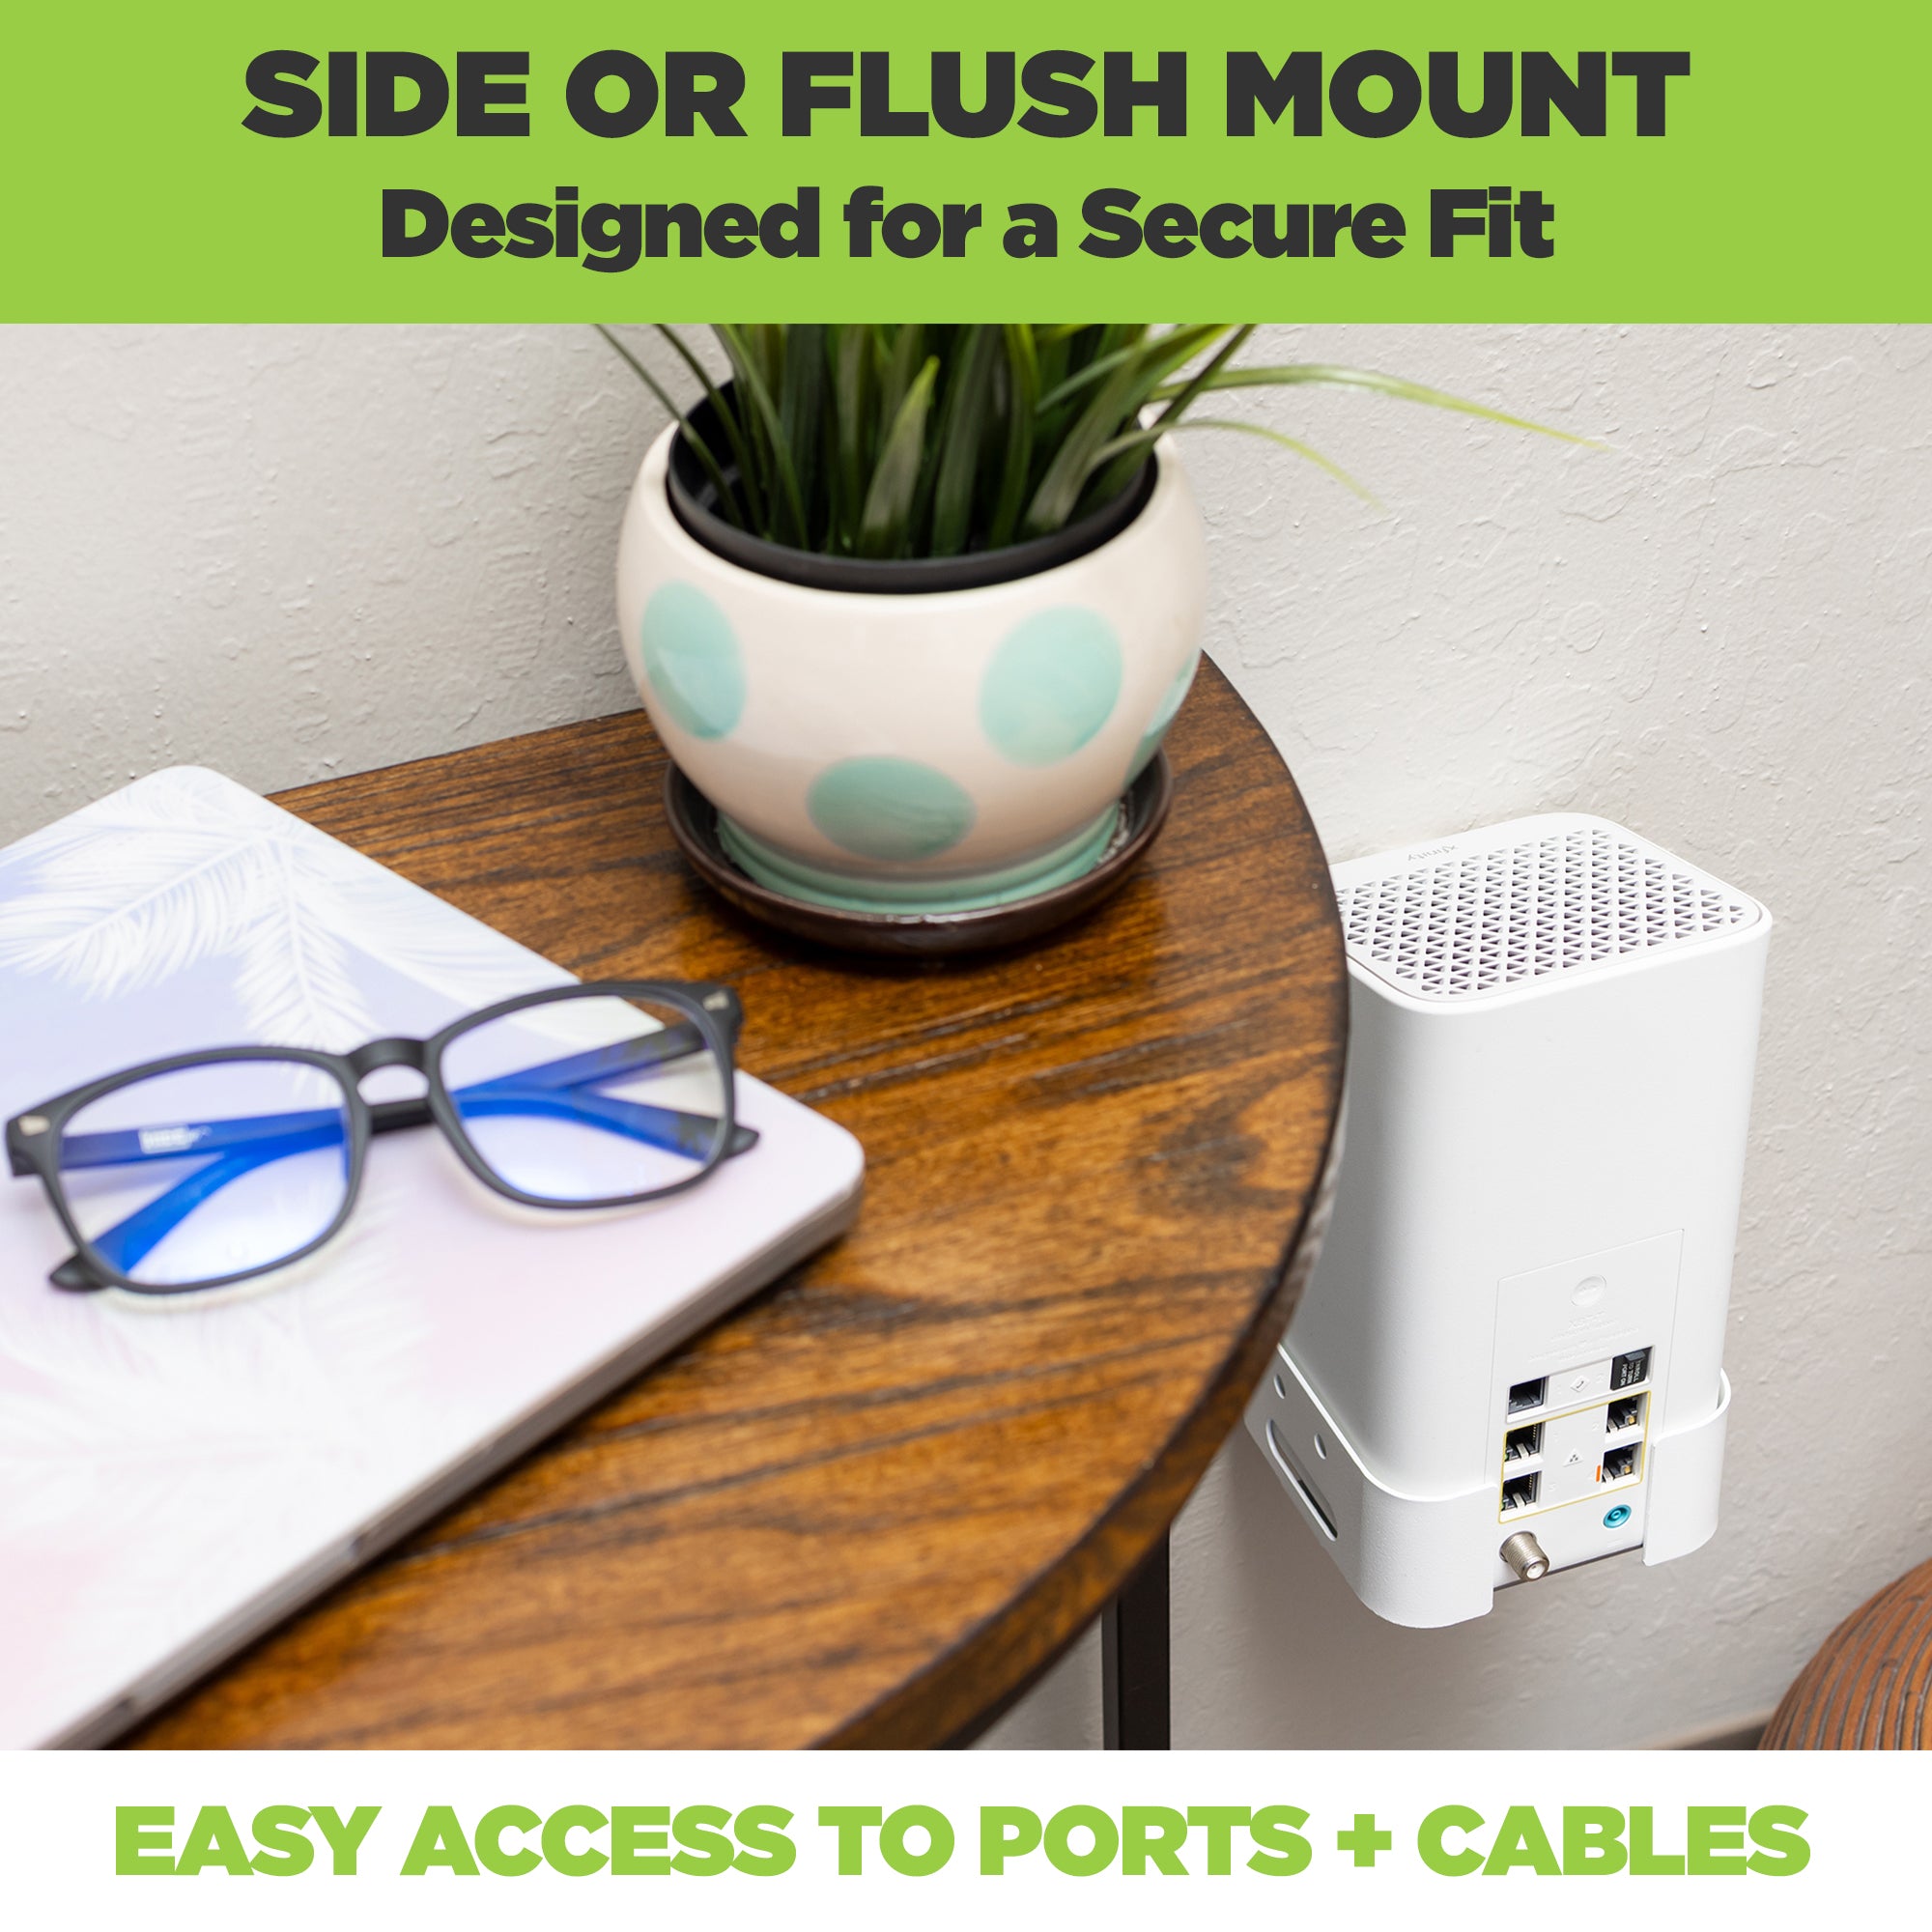 With the HIDEit xFi Gateway Mount you can mount your Xfinity router on the side or front of the device.